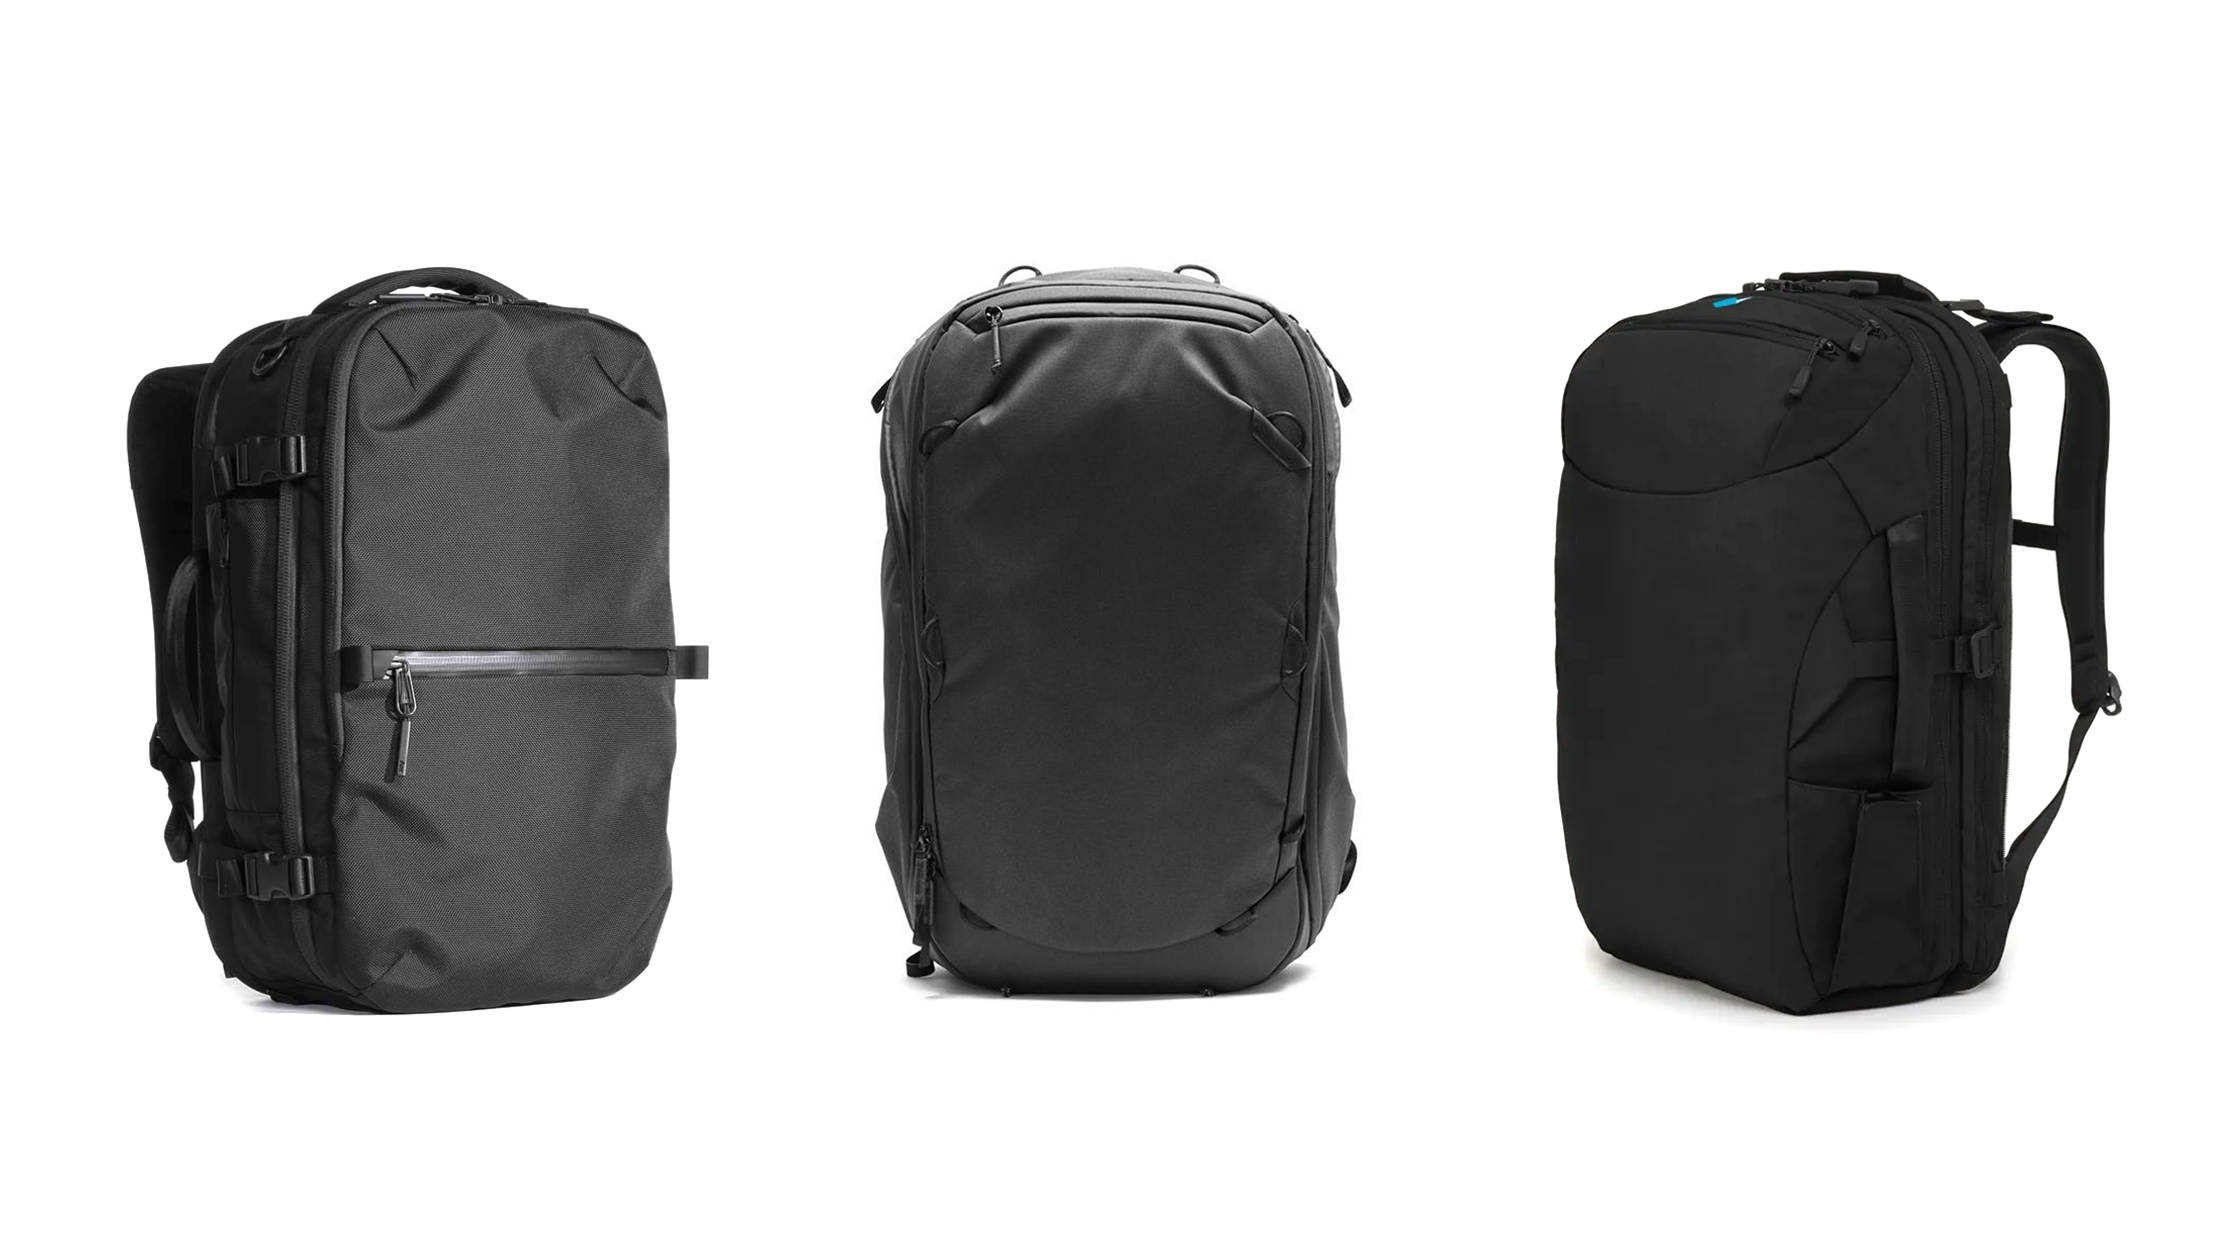 Best Travel Backpack: How To Pick In 